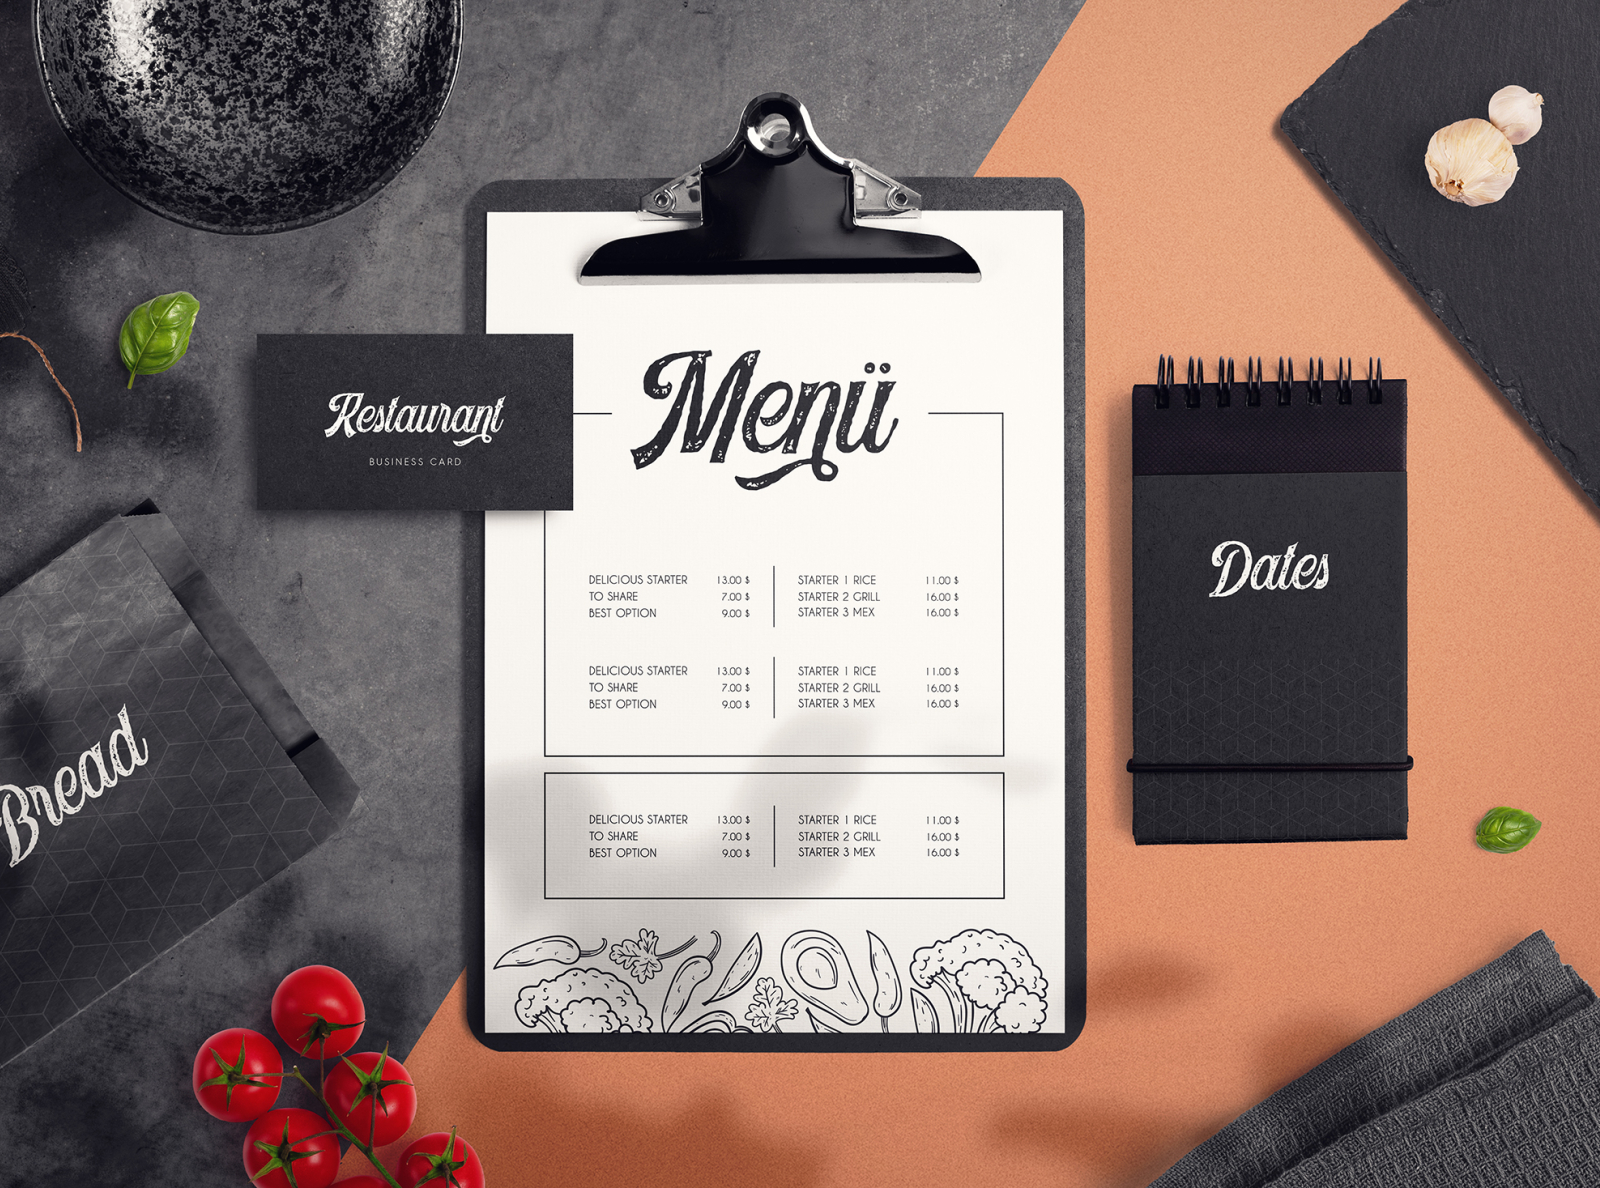 Food & Restaurant Mockup Collection by Grand Design Shop on Dribbble